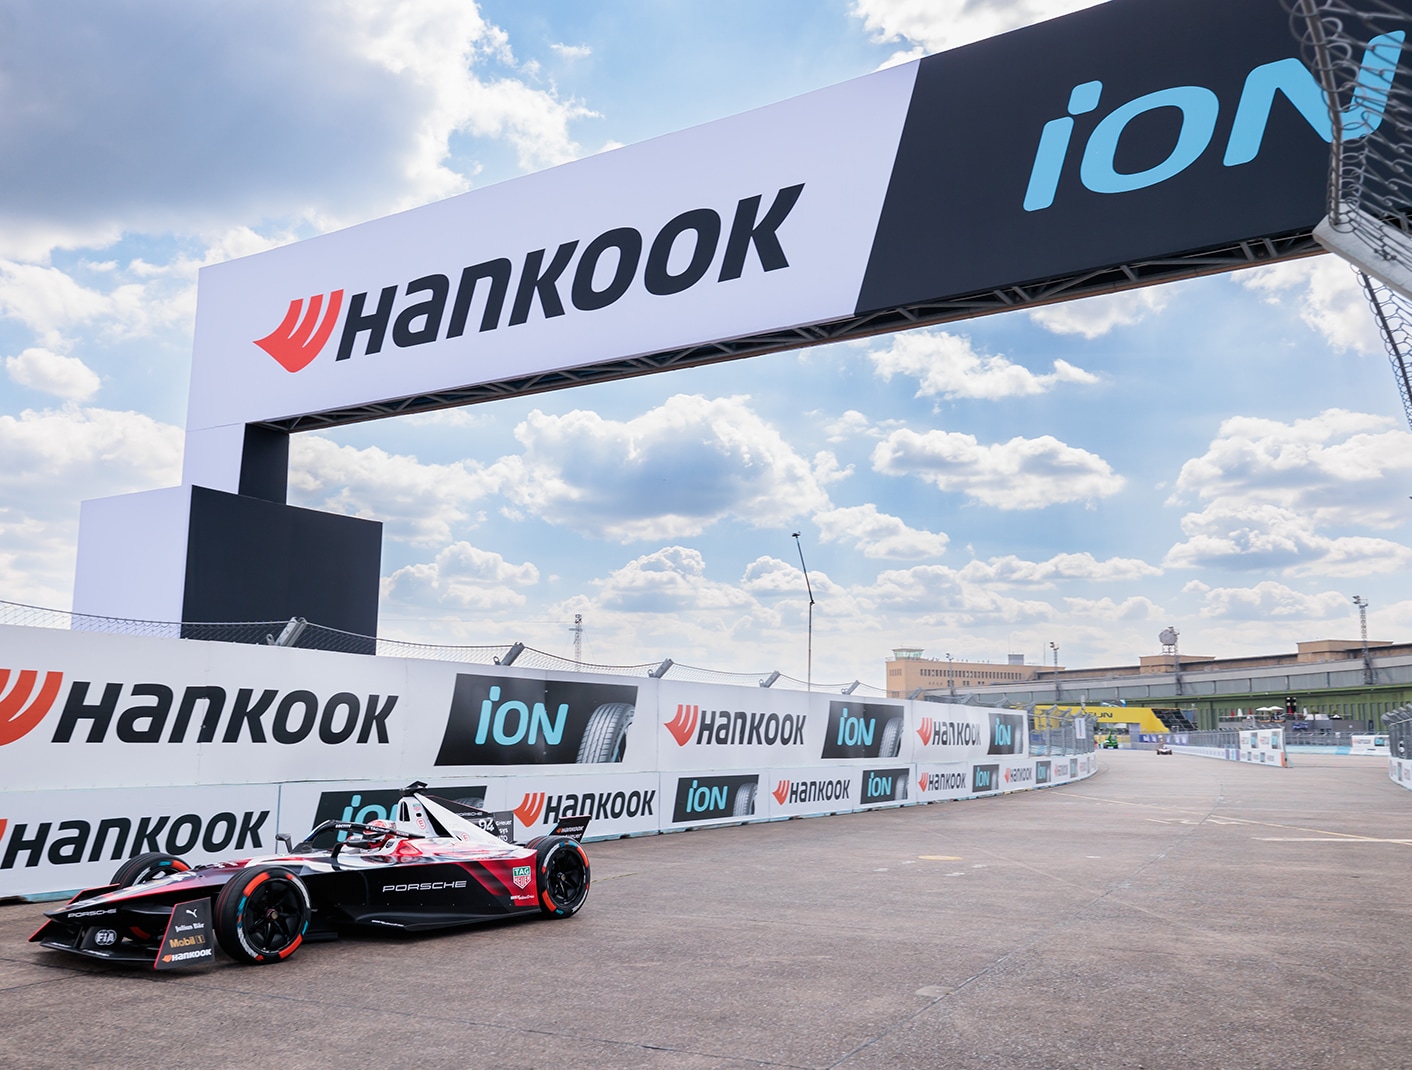 The grand finale: New Formula E world champion to be crowned at the Hankook London E-Prix